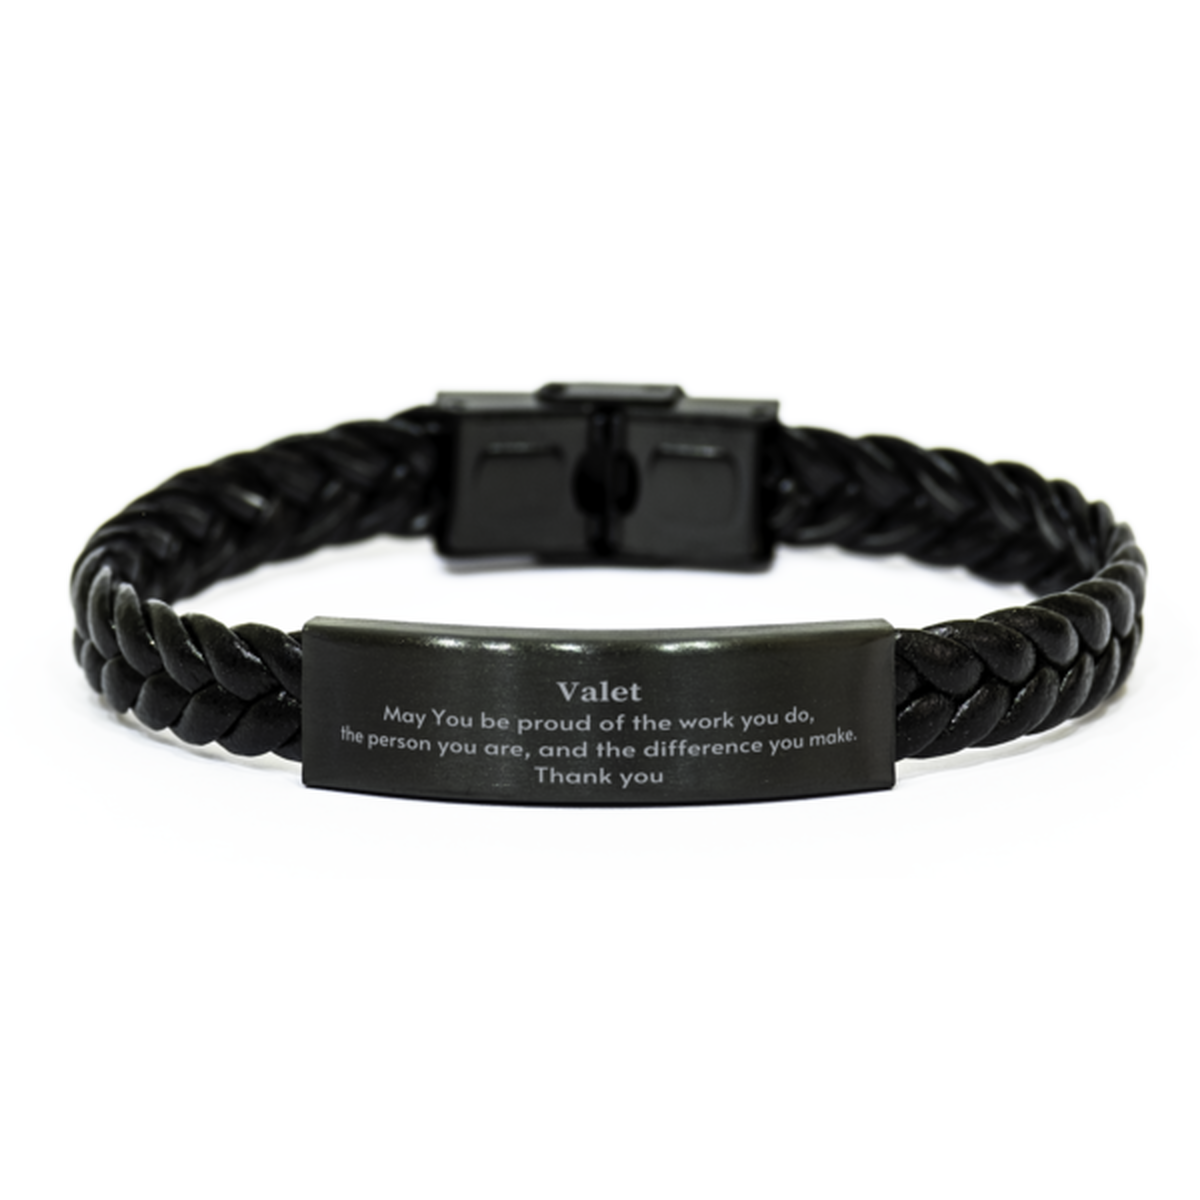 Heartwarming Braided Leather Bracelet Retirement Coworkers Gifts for Valet, Valet May You be proud of the work you do, the person you are Gifts for Boss Men Women Friends